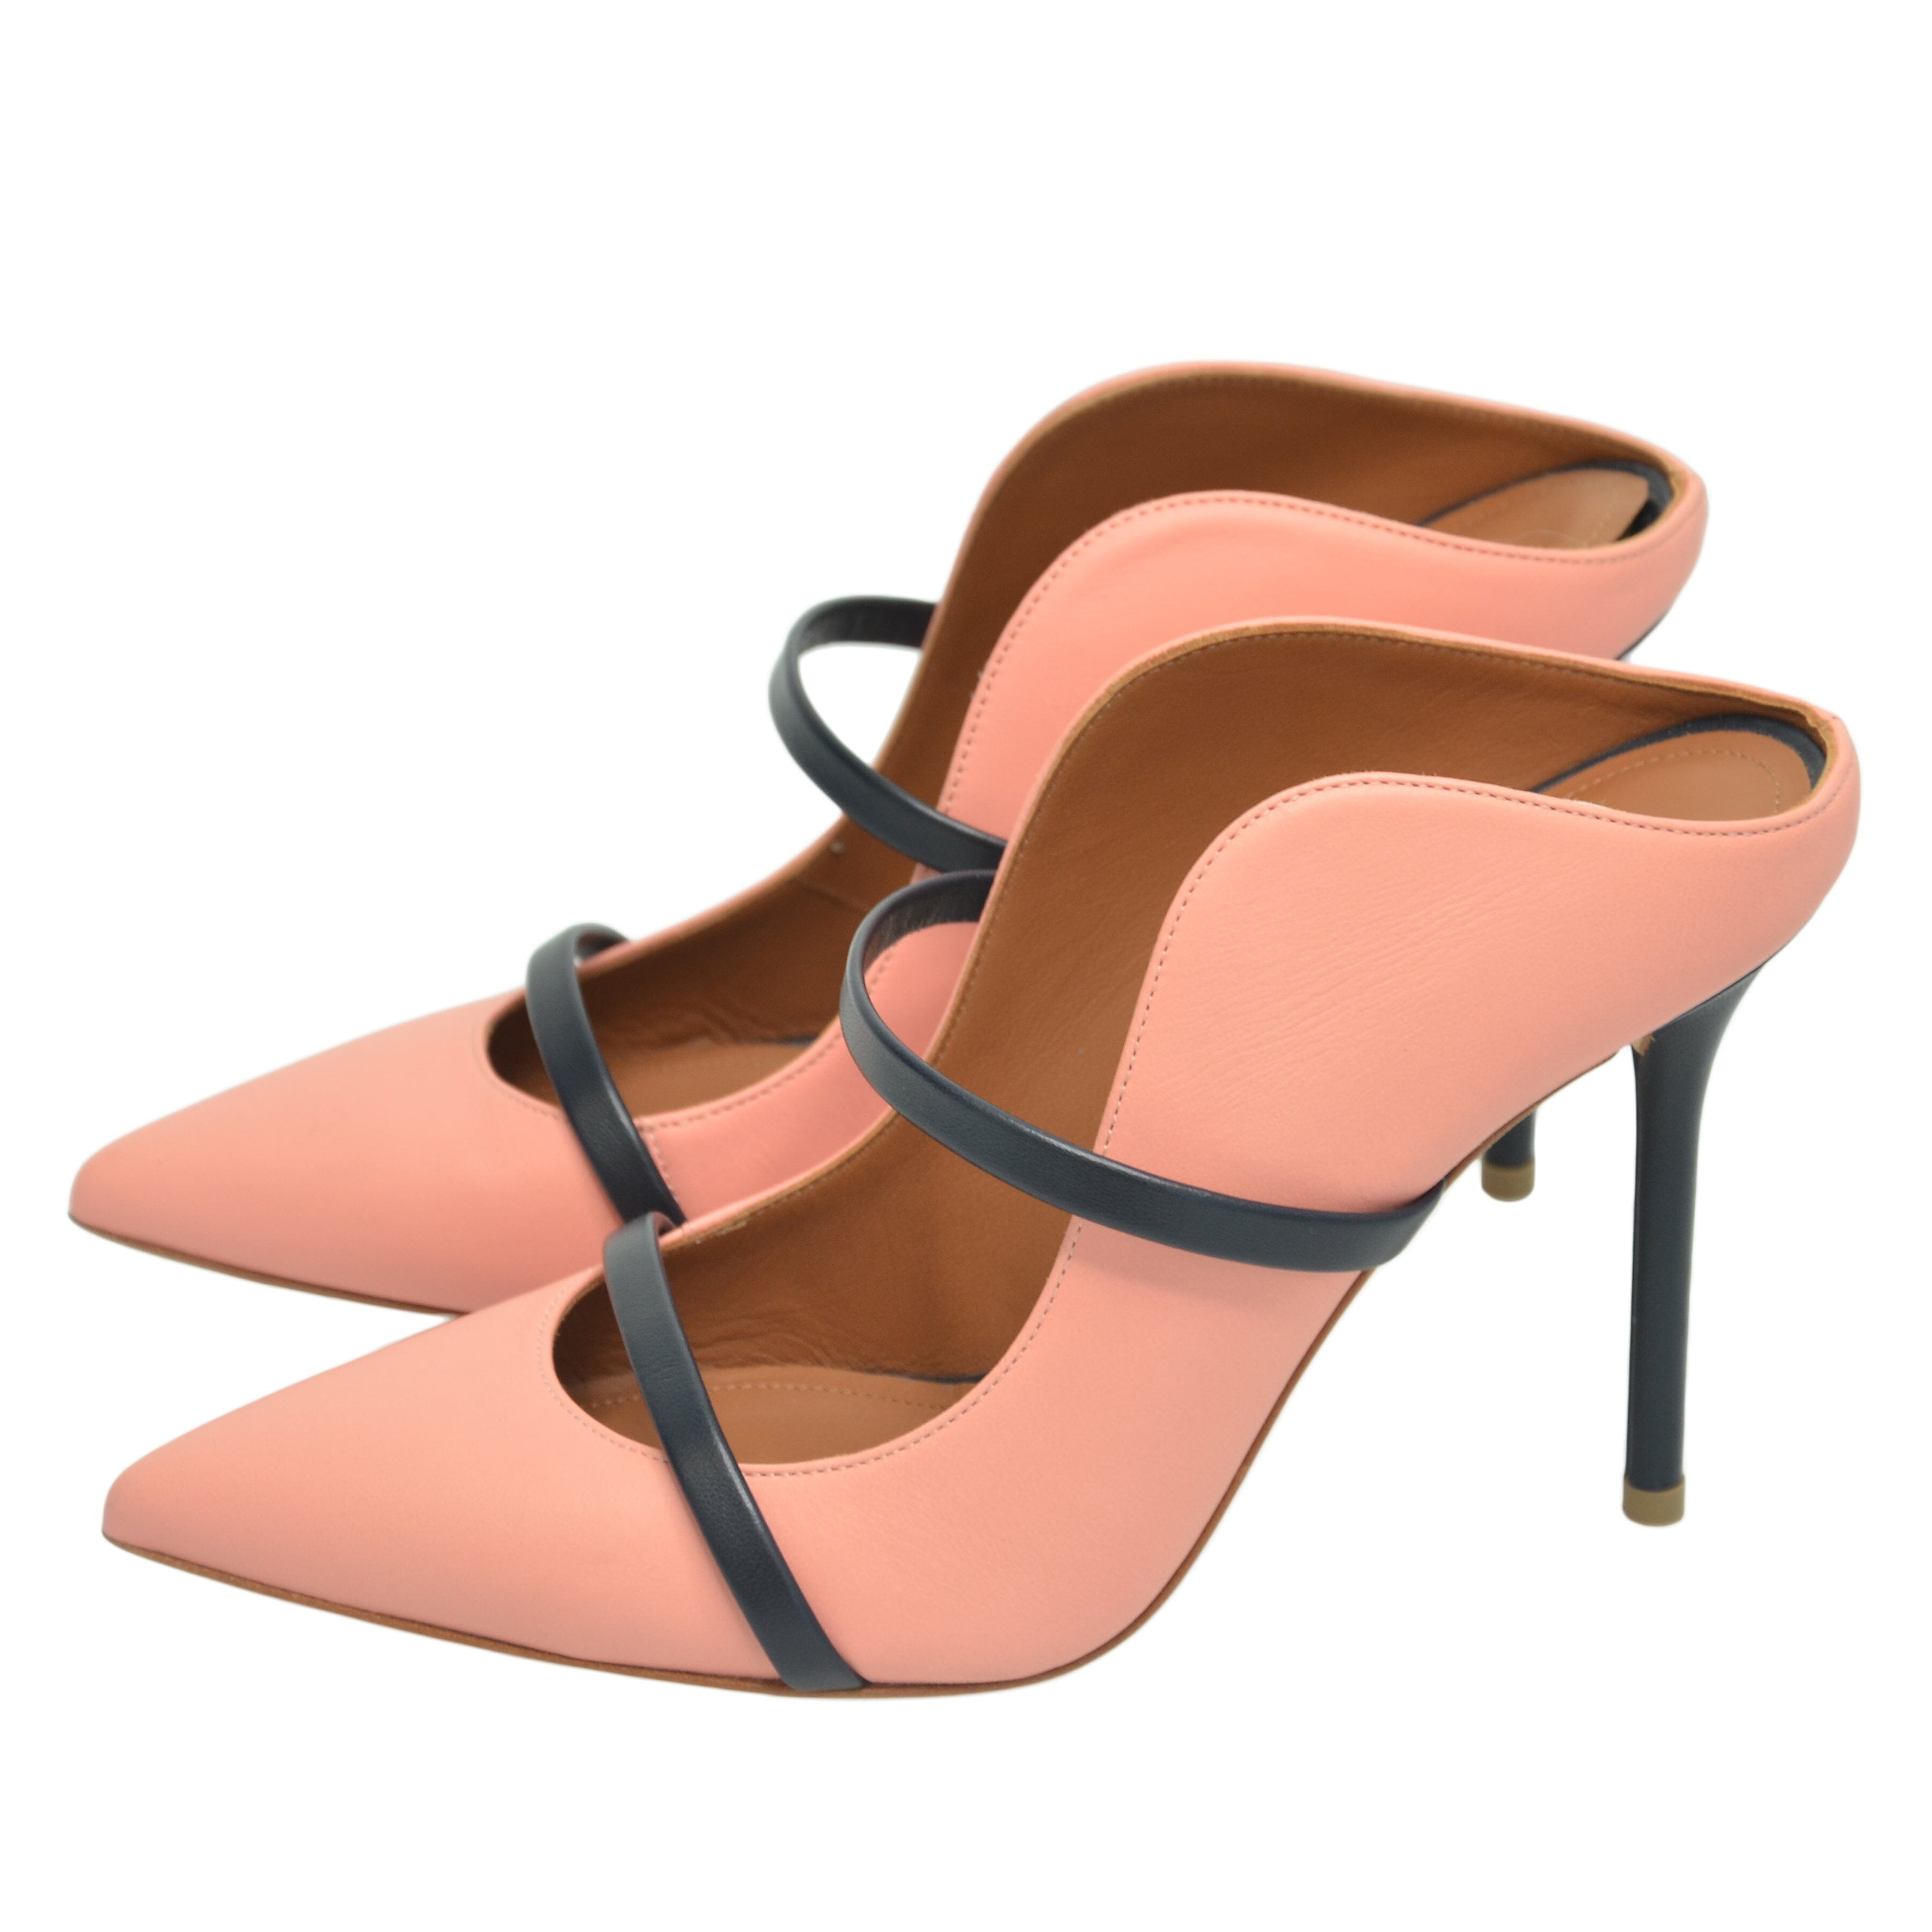 Pink/Black Maureen Pointed Toe Mules Shoes Malone Souliers